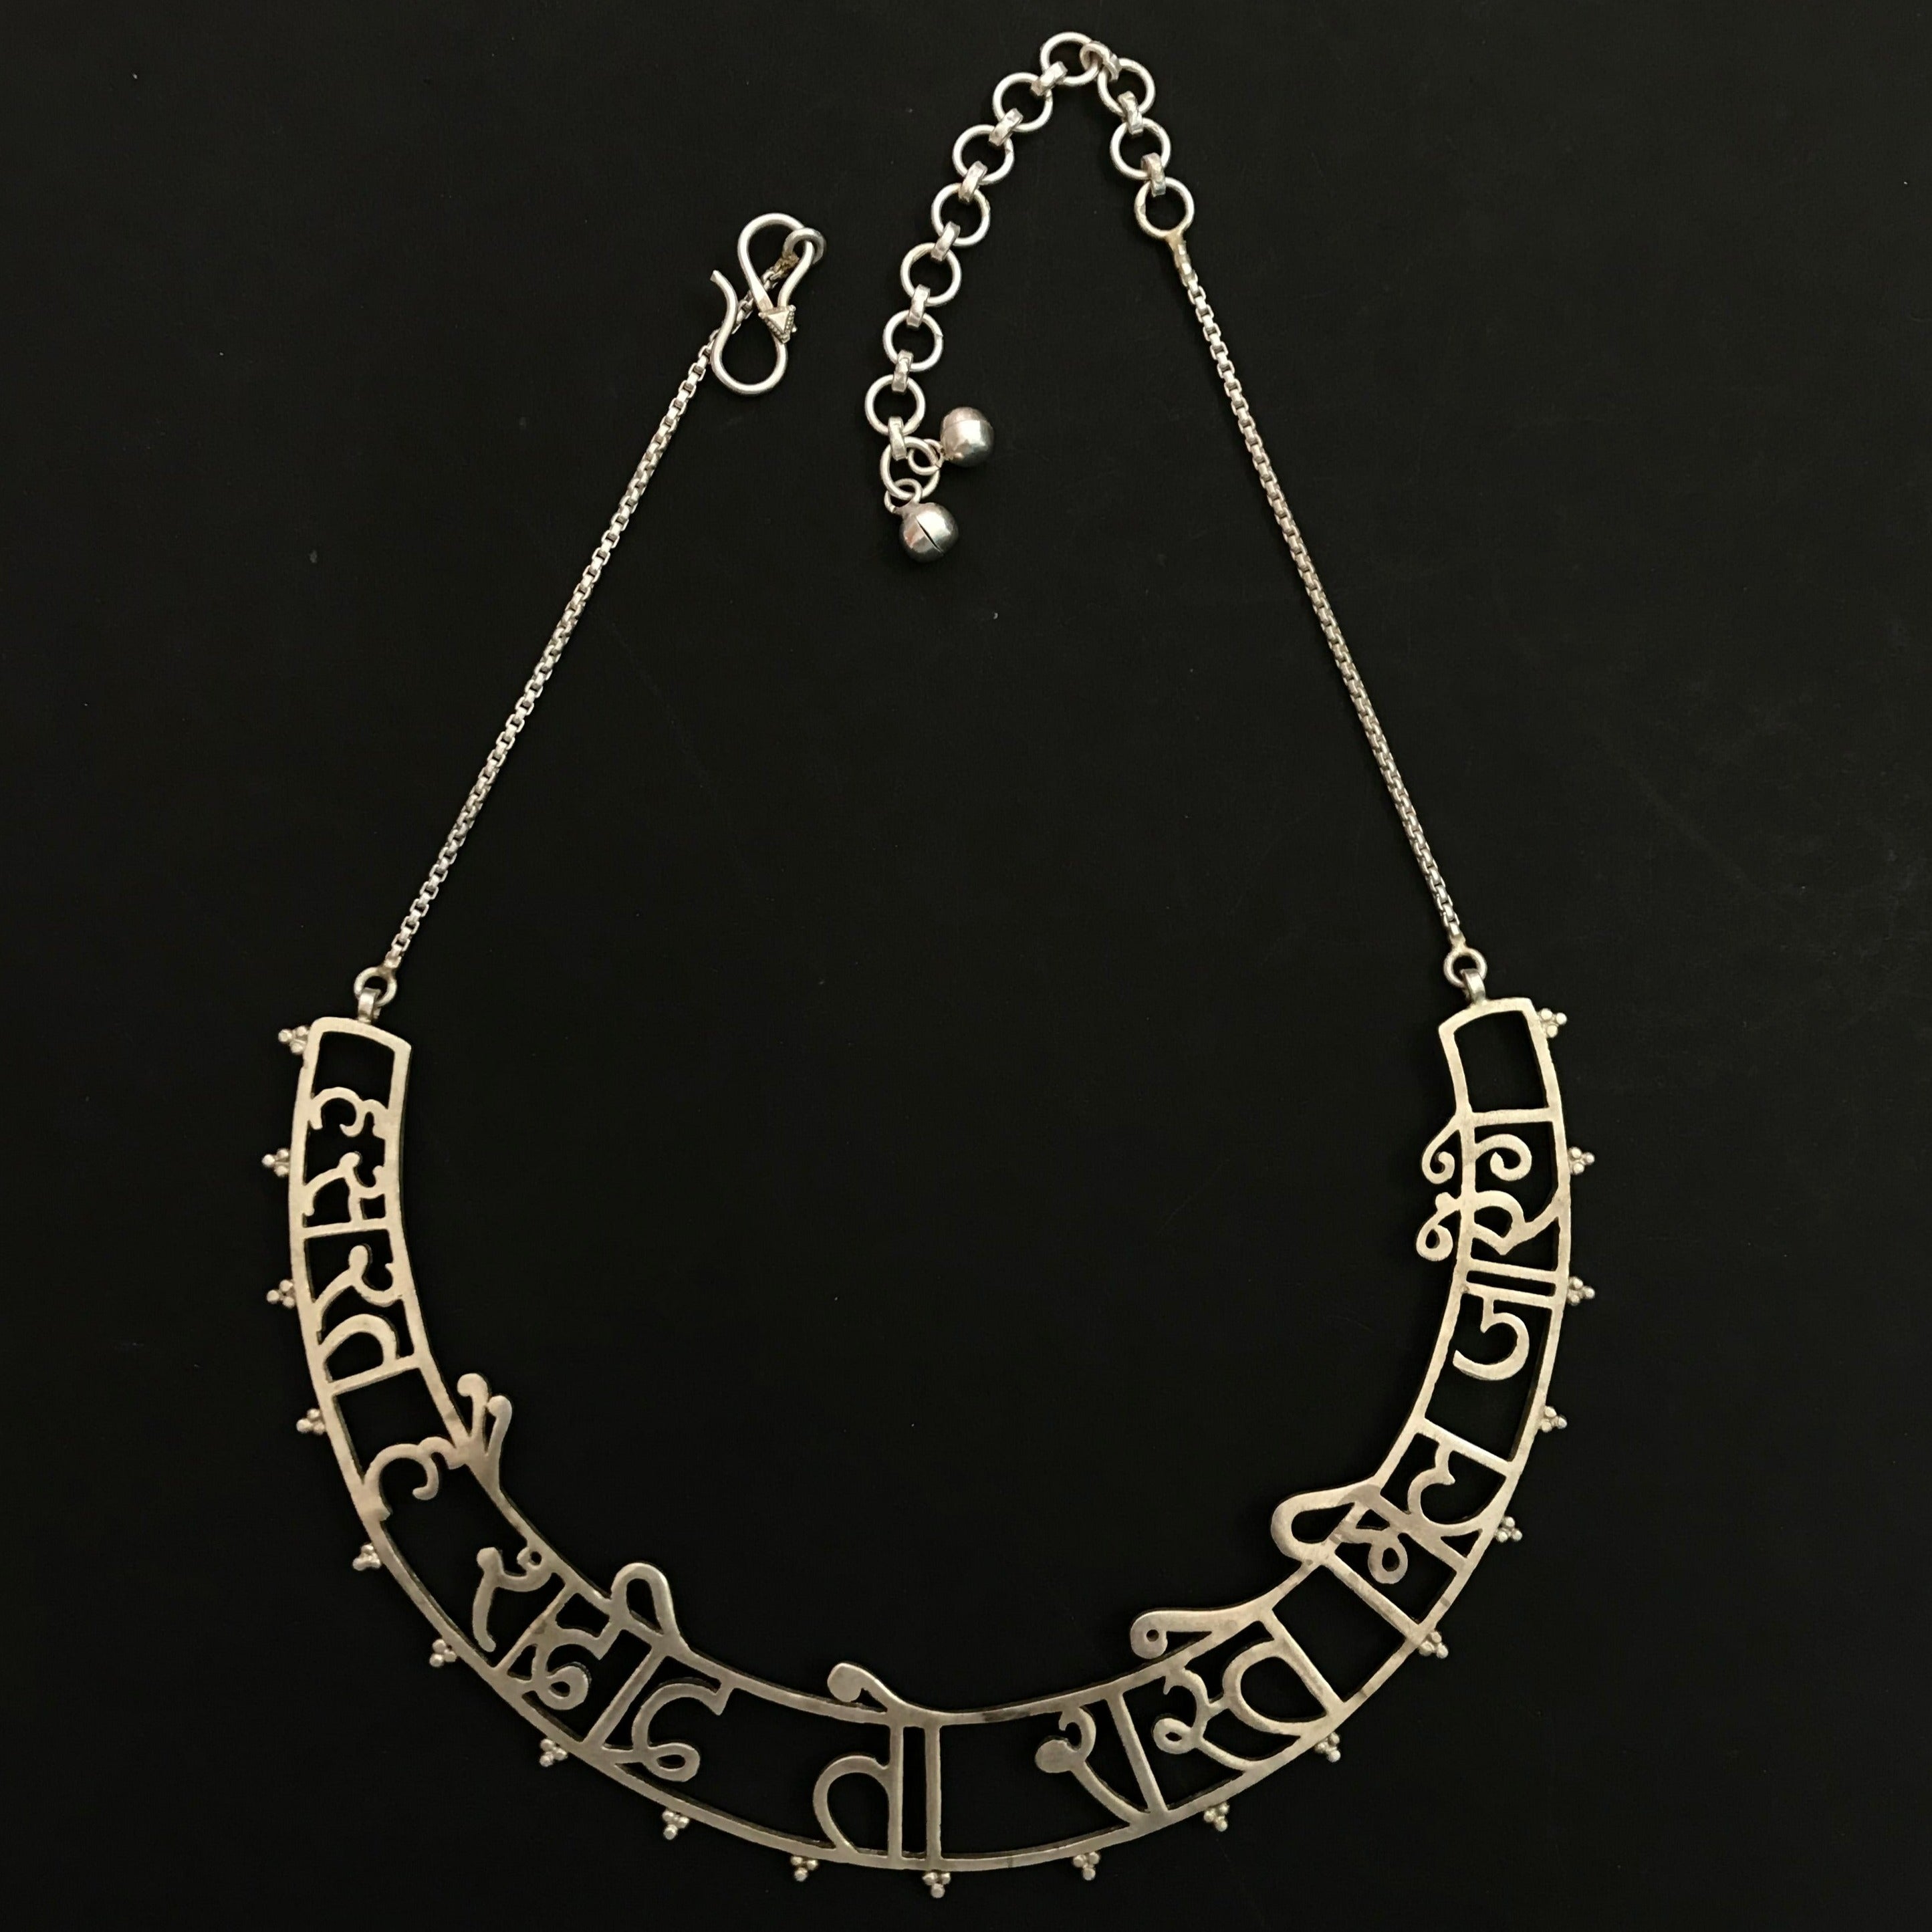 Quirksmith's Shark Tank India-approved Hasrat Hai Shadeed Necklace - a poetic journey in handcrafted 92.5 silver.